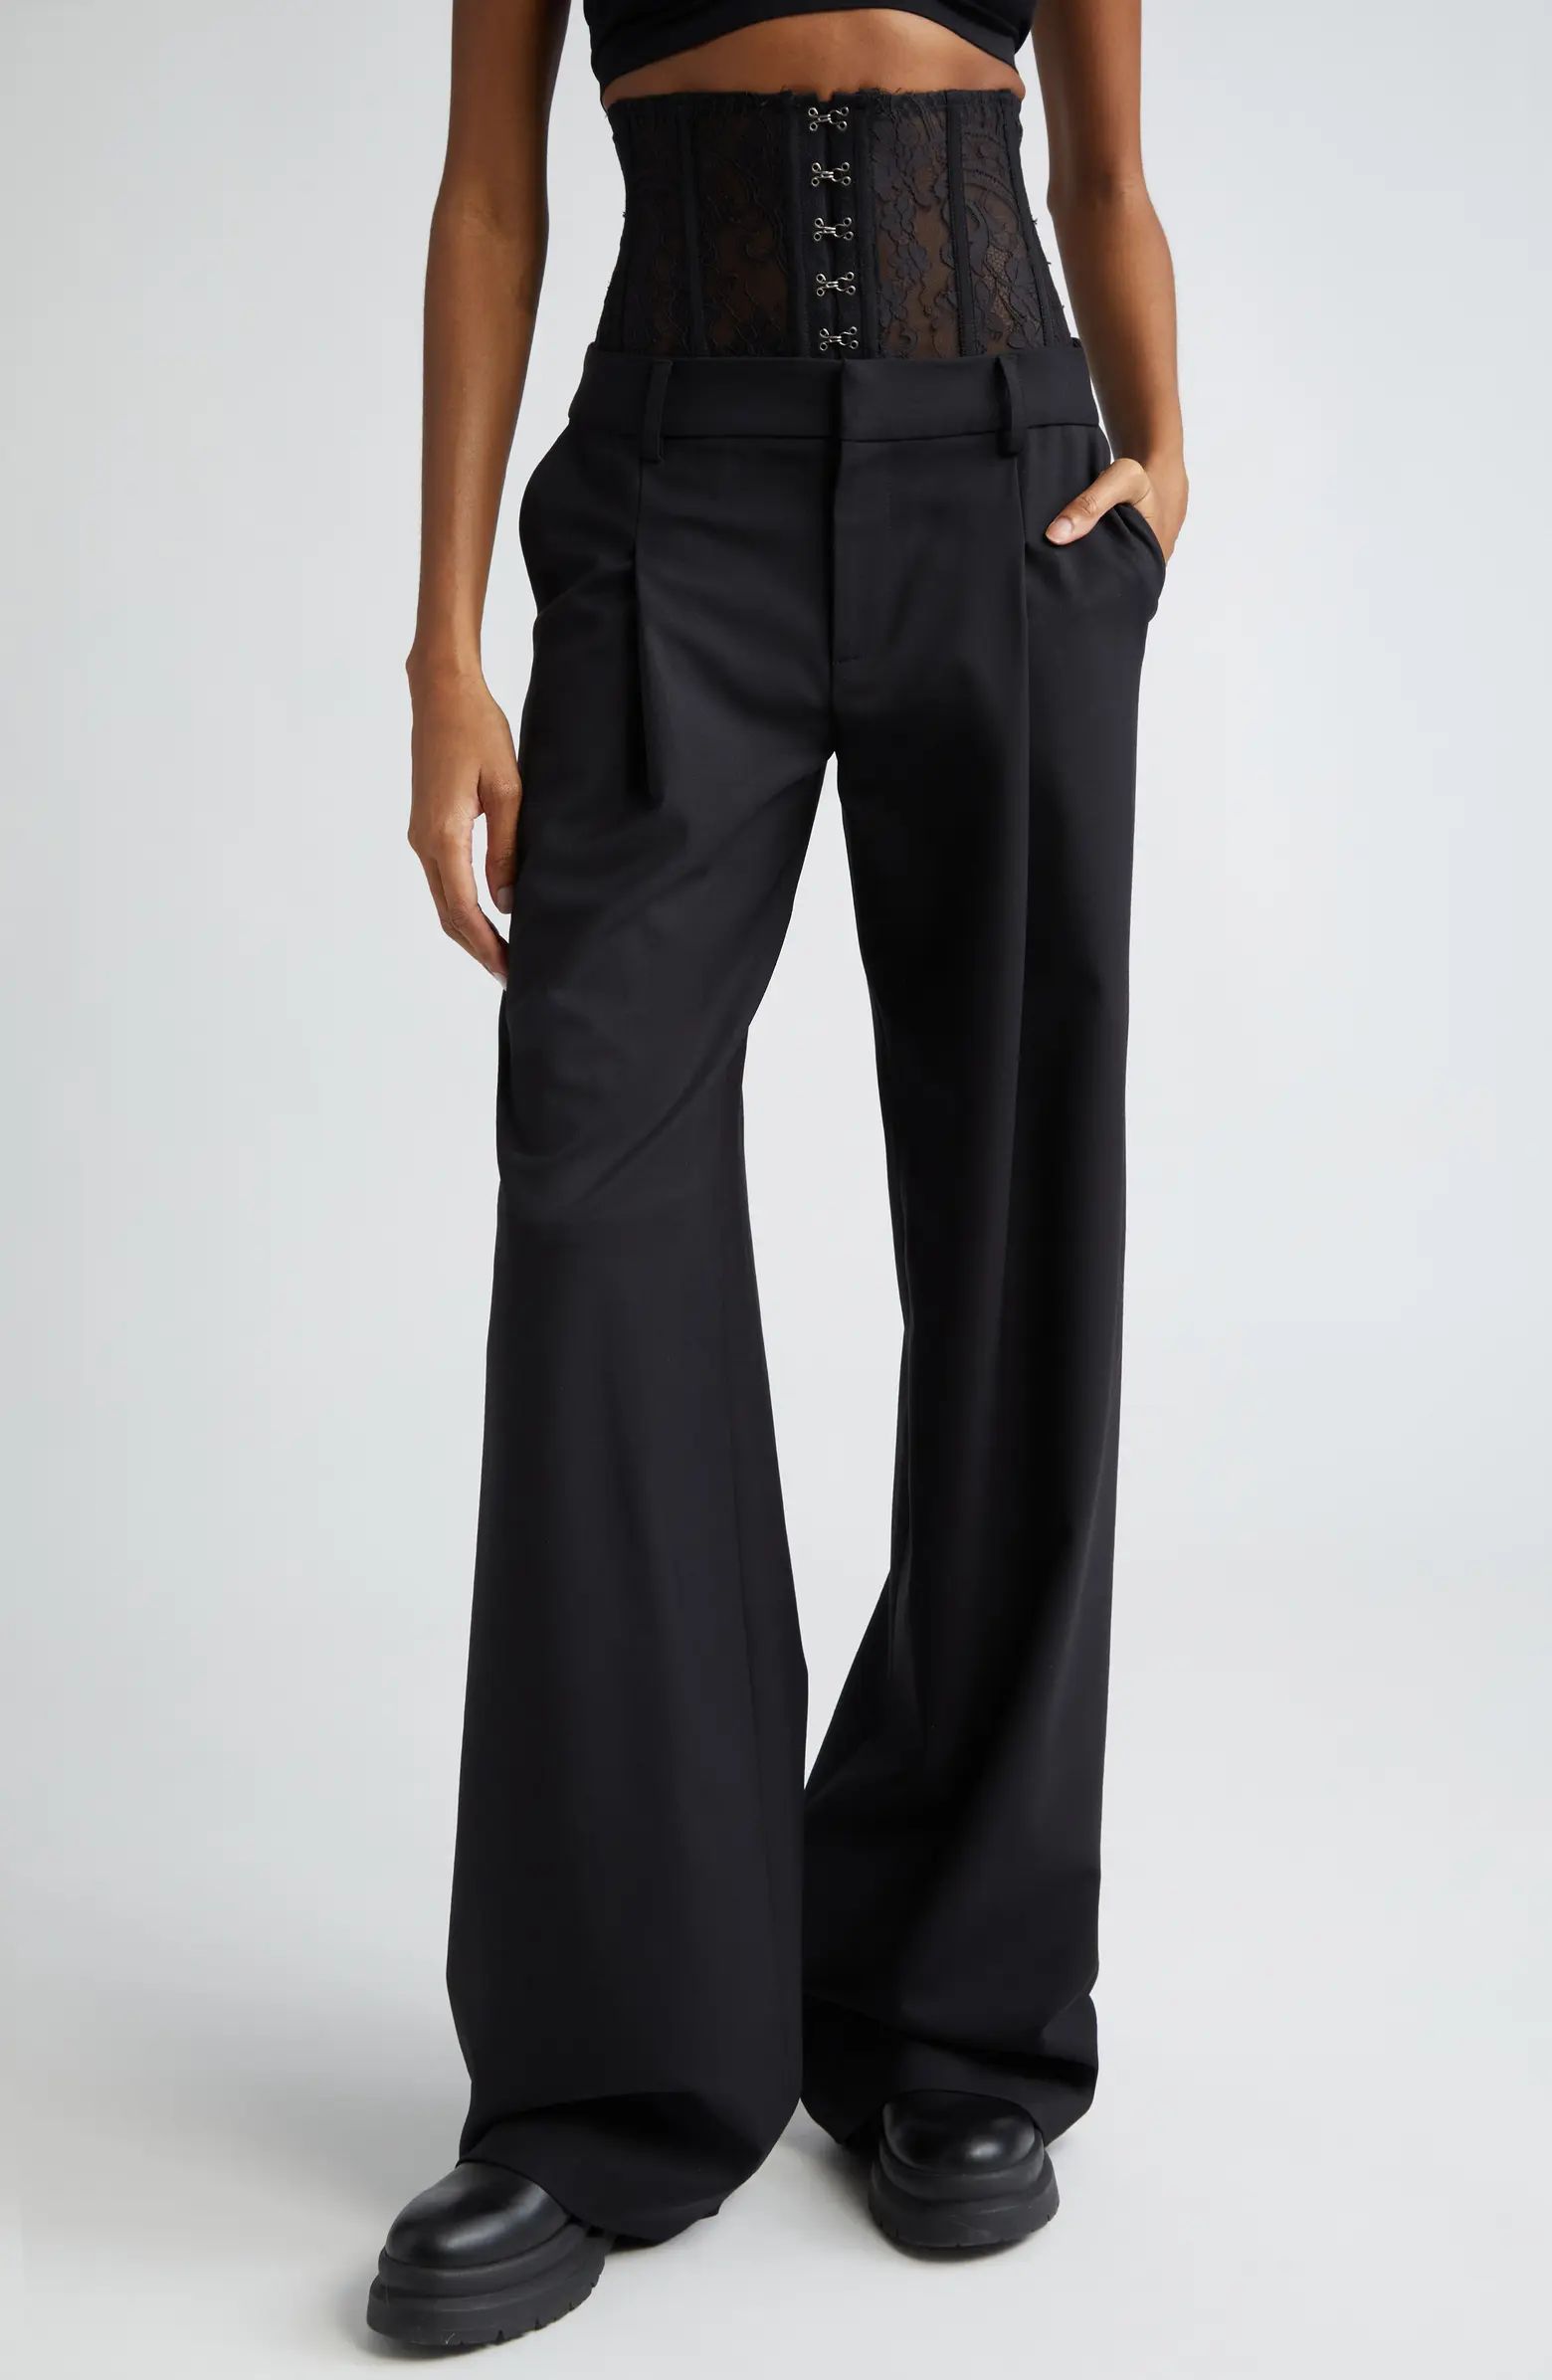 Floral Lace Stretch Virgin Wool Bustier Wide Leg Trousers | Nordstrom